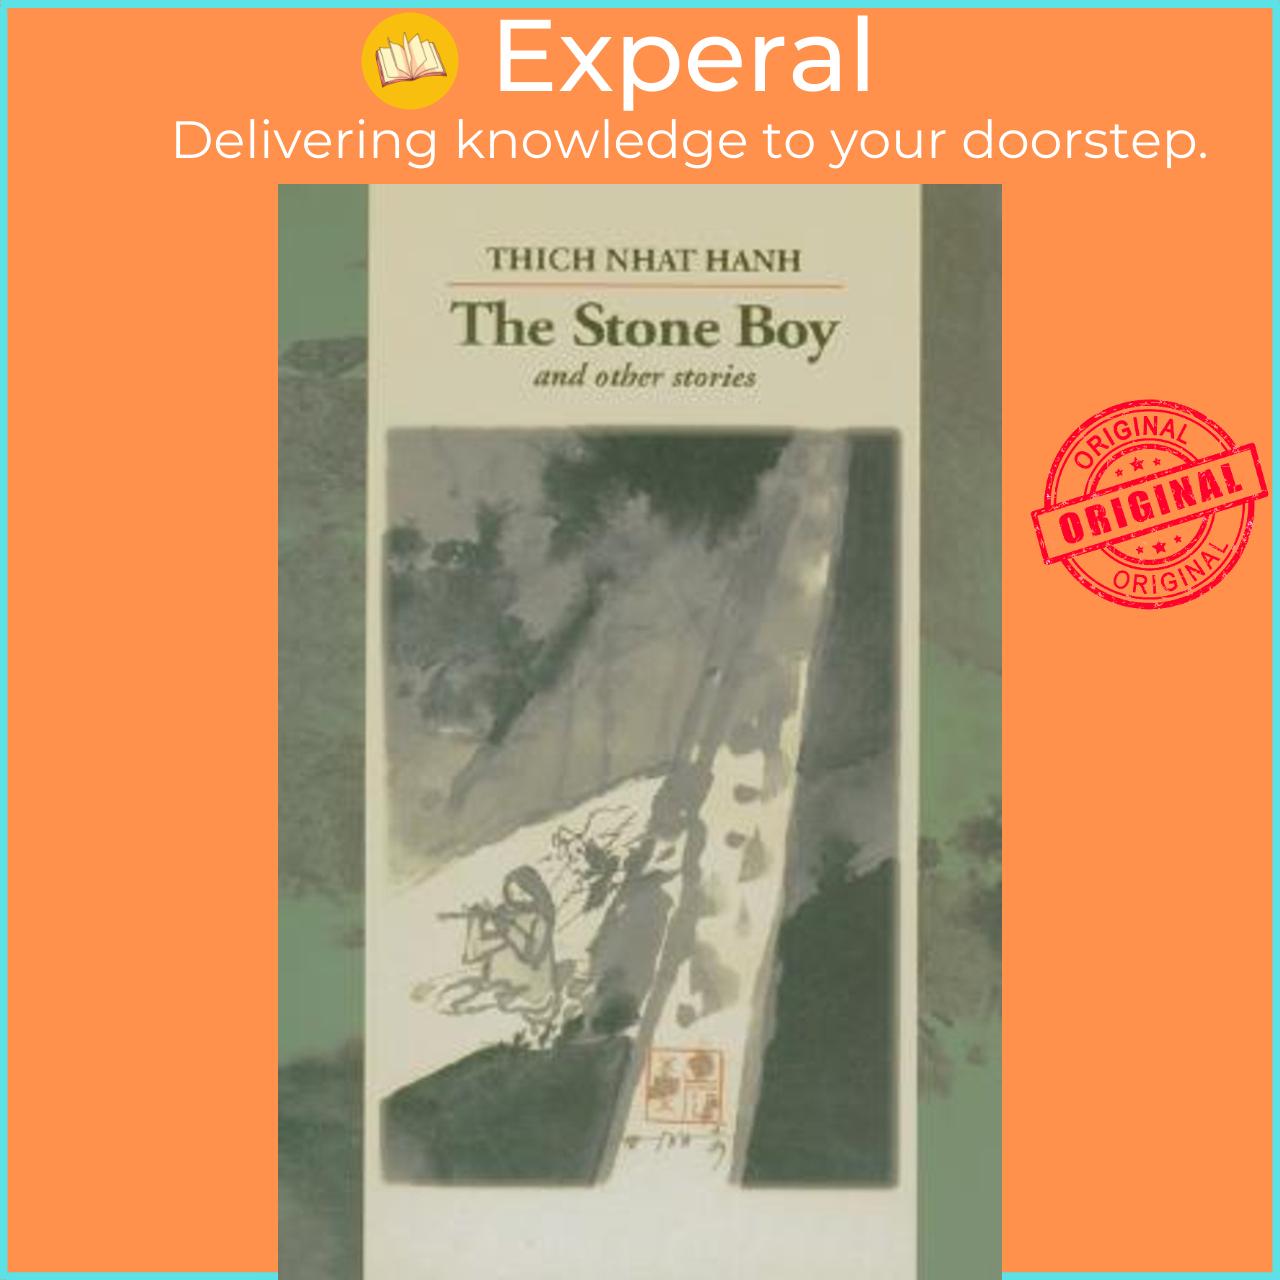 Sách - The Stone Boy and Other Stories by Thich Nhat Hanh Nguyen Thi Hop (US edition, paperback)